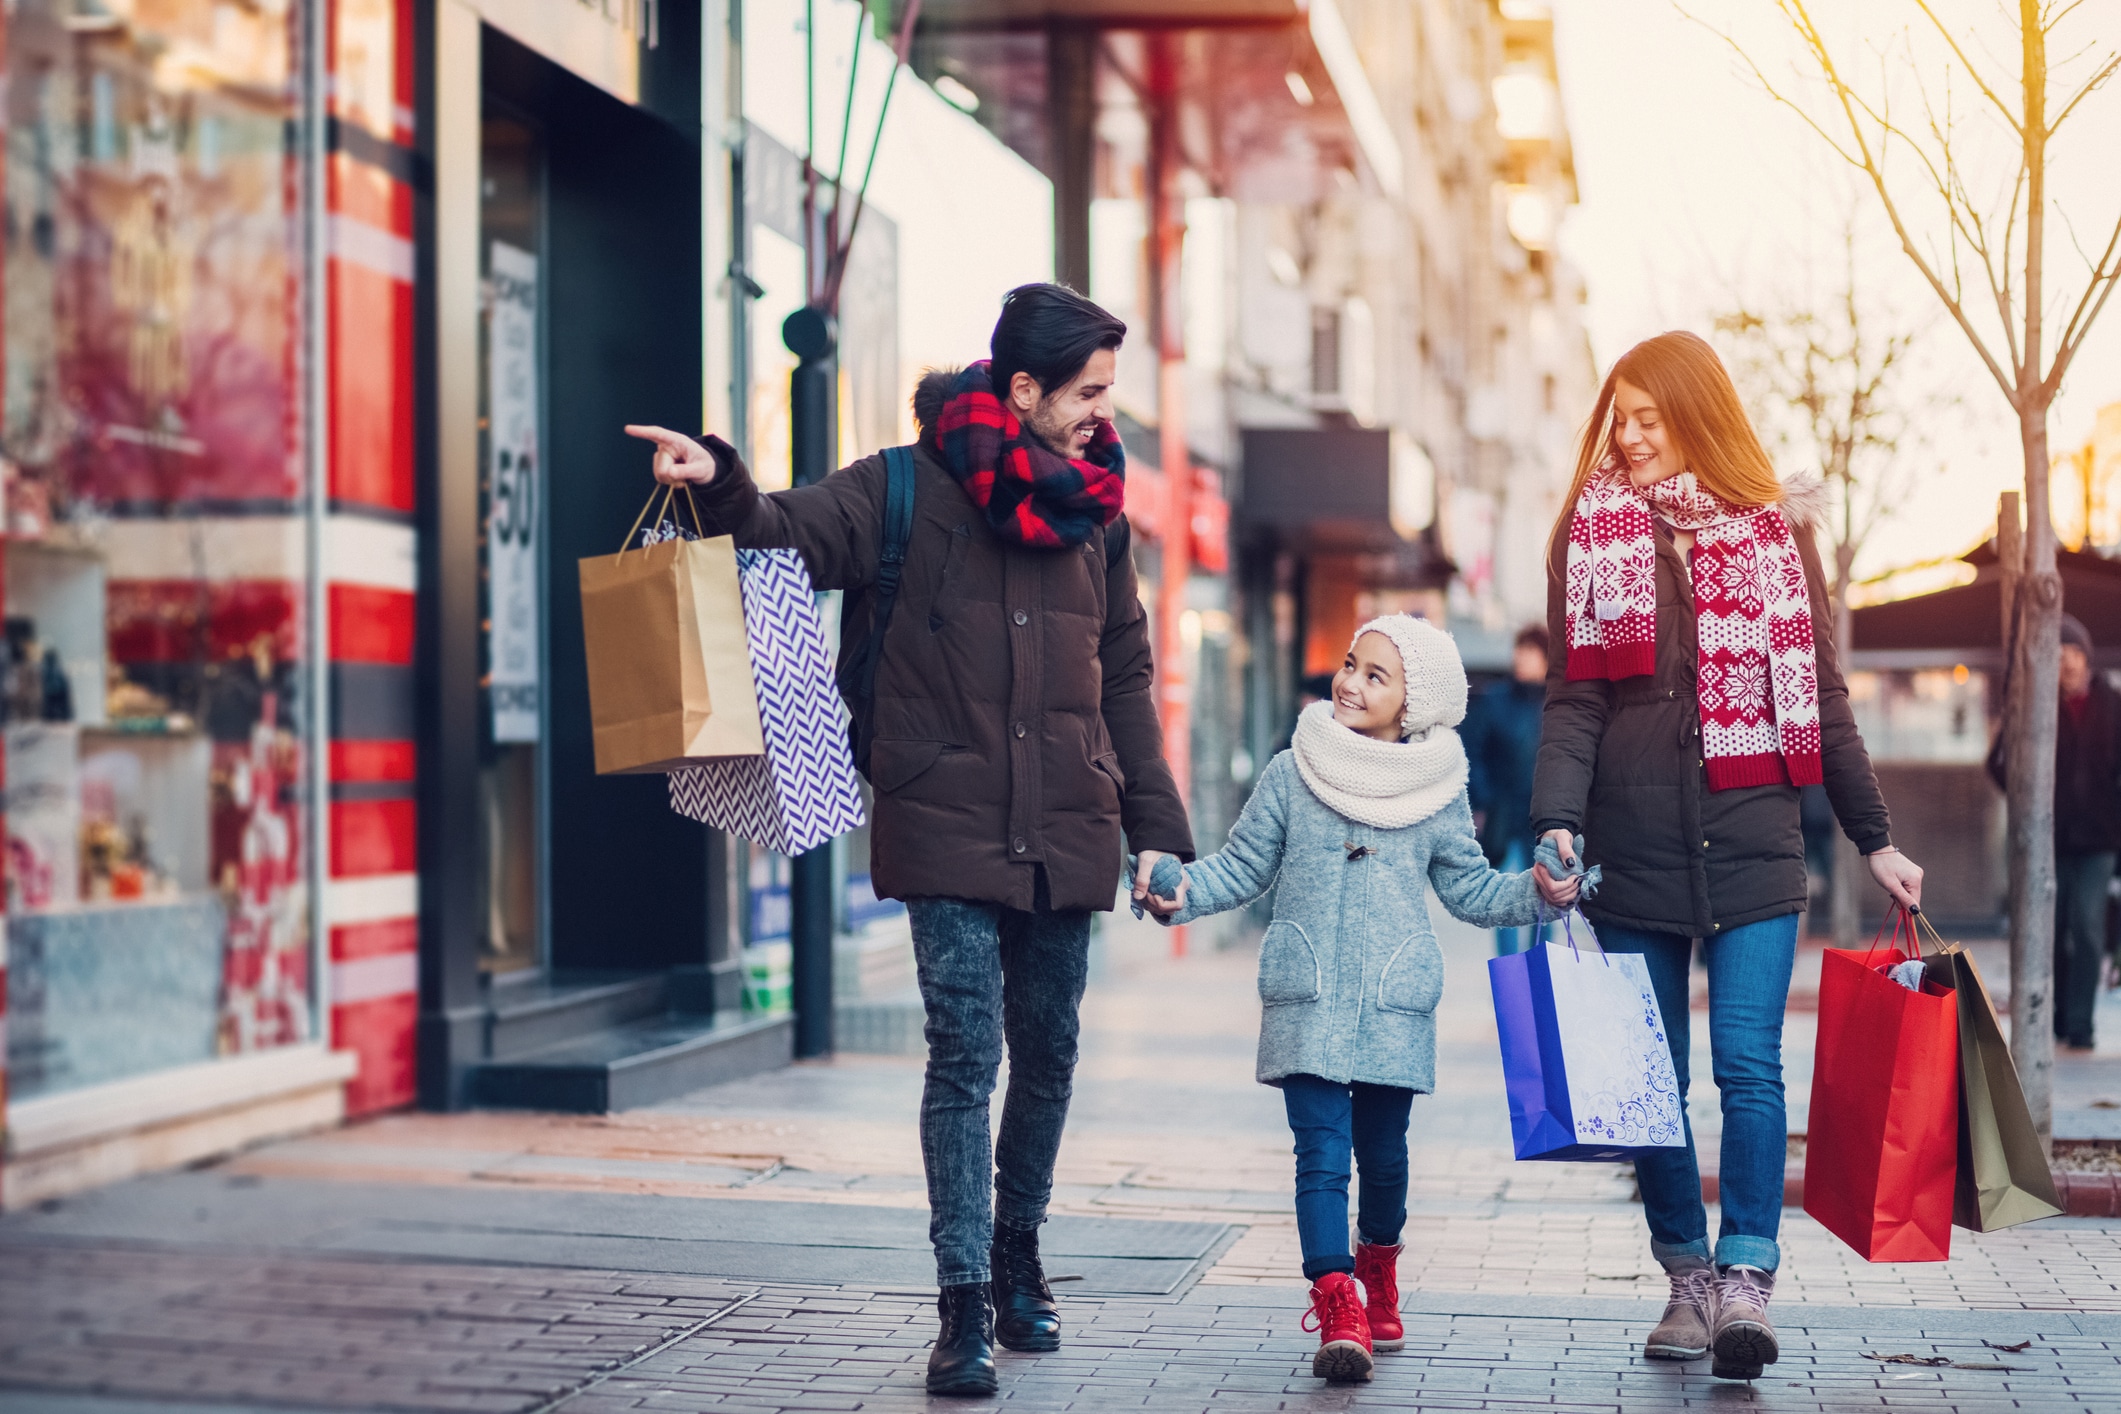 Inaugural 10.10 Shopping Festival to Deliver the Holidays to American Consumers